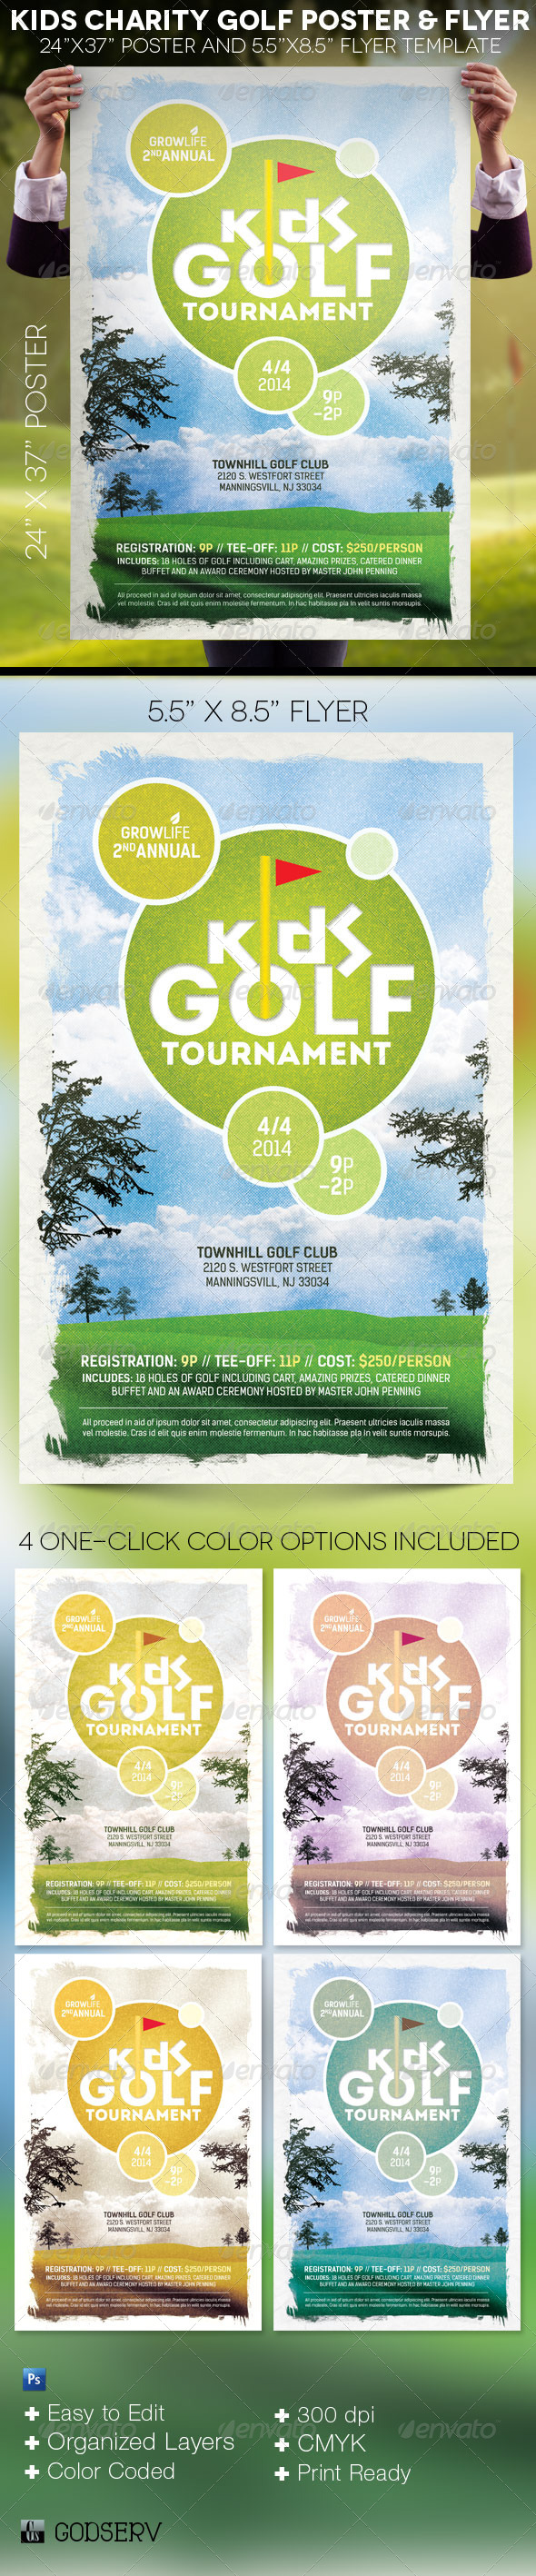 Kids-Charity-Golf-Poster-and-Flyer-Template-Preview